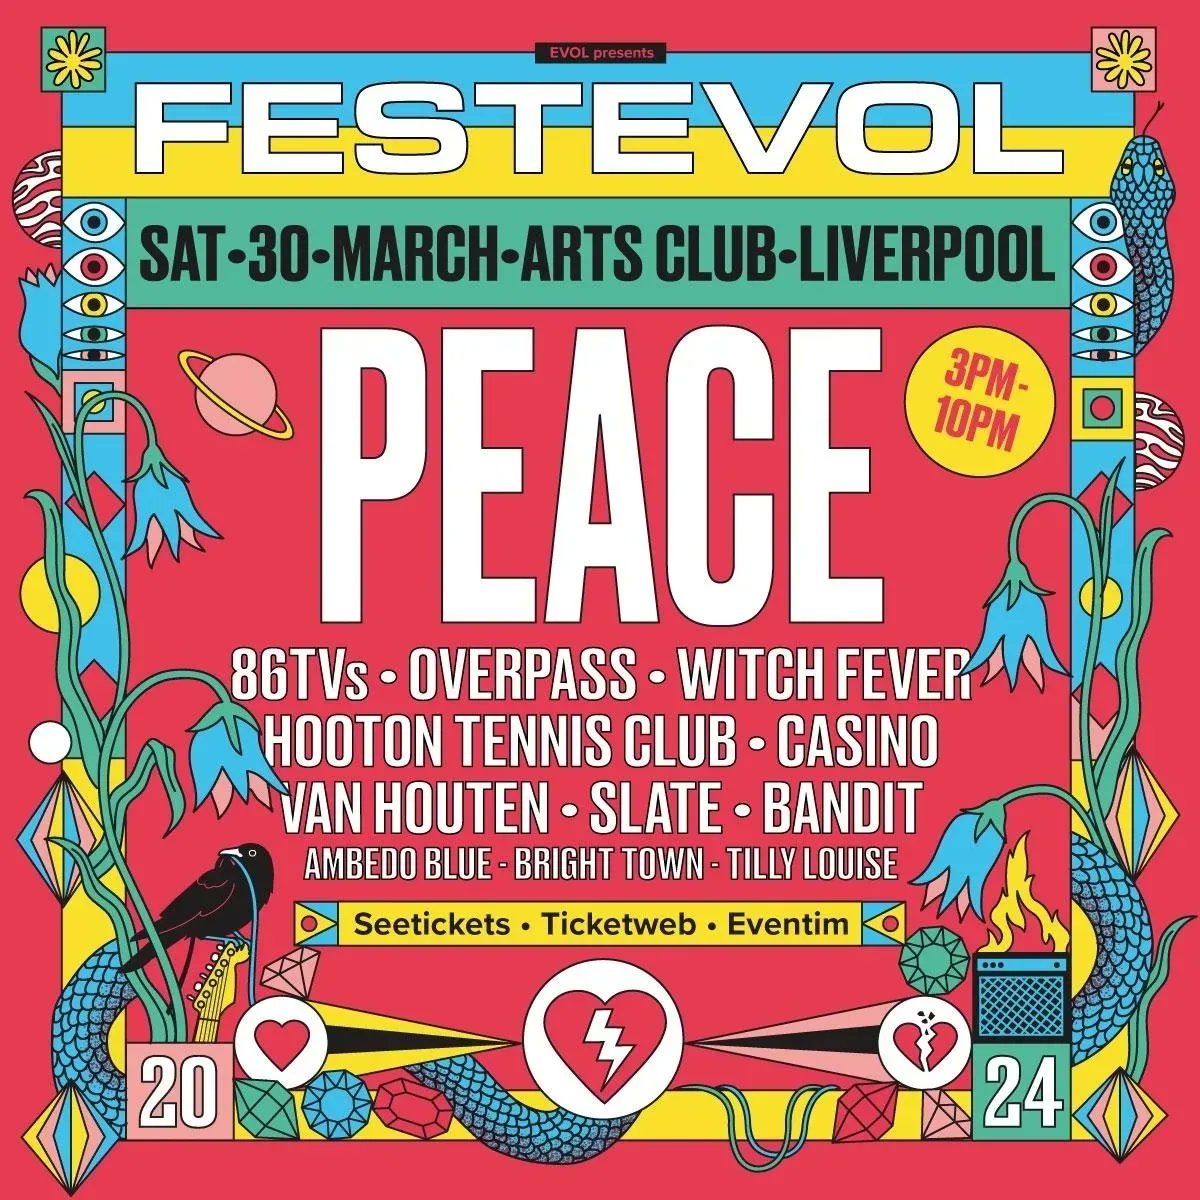 Handpicked by legendary, cult Liverpool bands @Lightning_Seeds & @ZutonsThe for support slots and handpicked for #FestEvol24 all-dayer by yours truly, Liverpool's Detroit-like soulful indie groove machine @Casino_band_ join us at @artsclublpool! Tickets: seetickets.com/event/festevol…